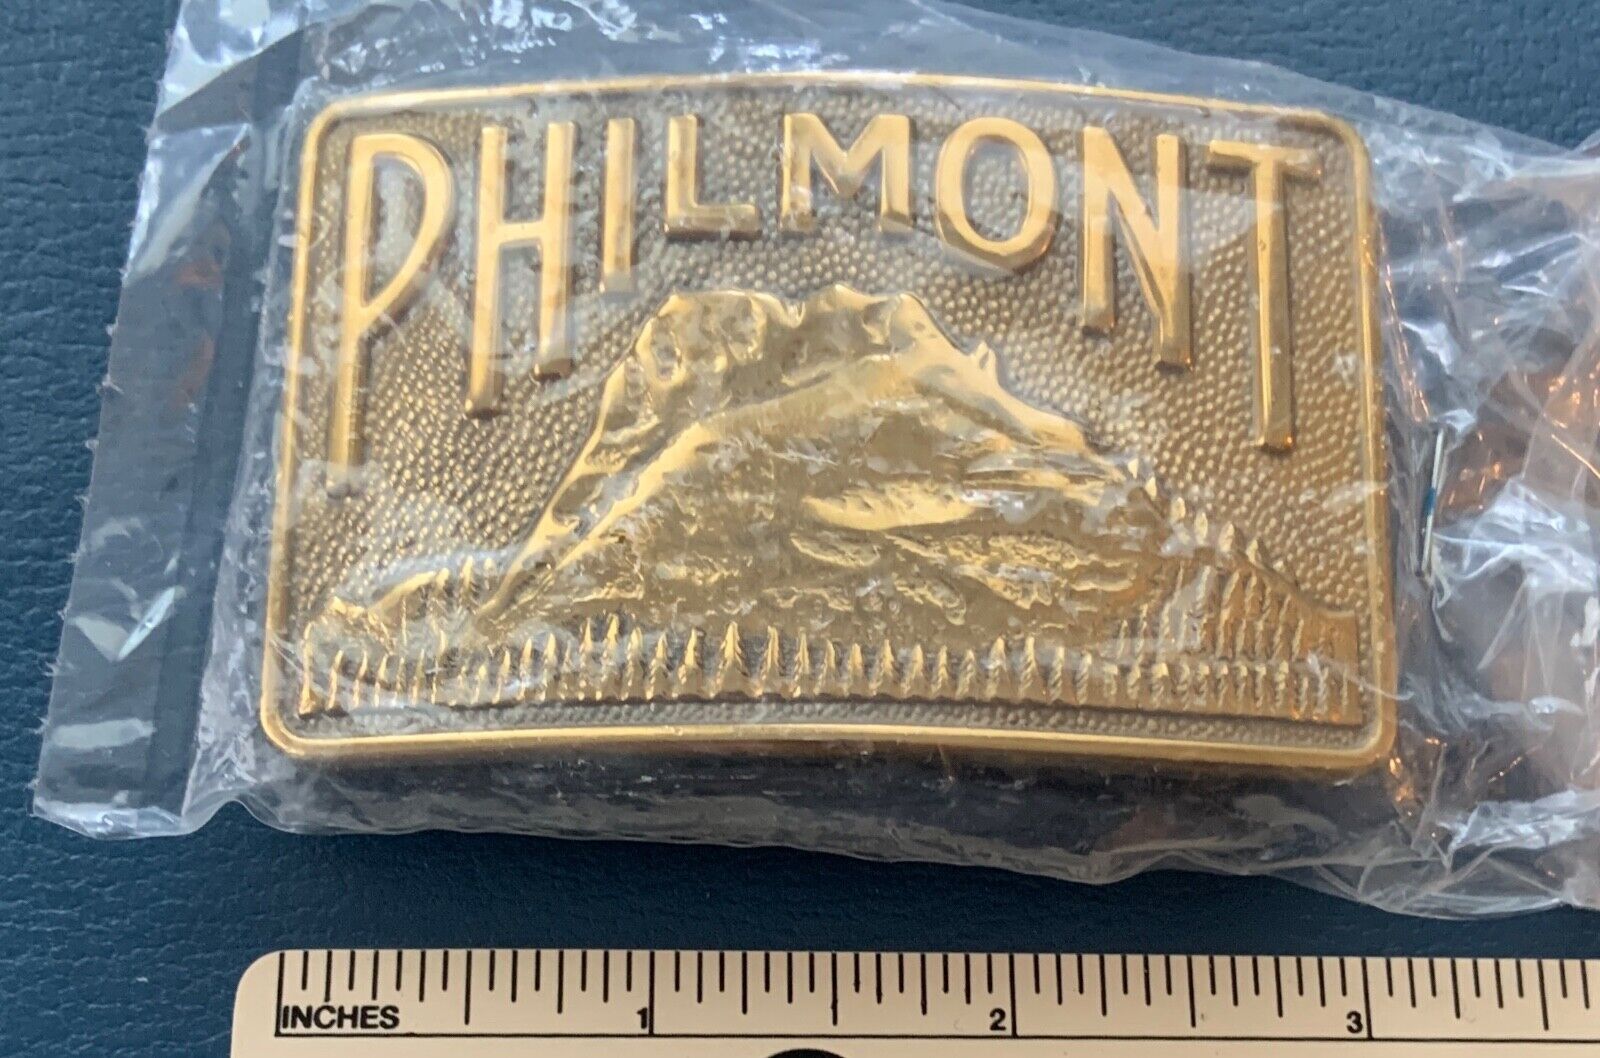 NOS Vintage PHILMONT RANCH Boy Scout Brass BELT BUCKLE Cimarron NM Tooth of Time